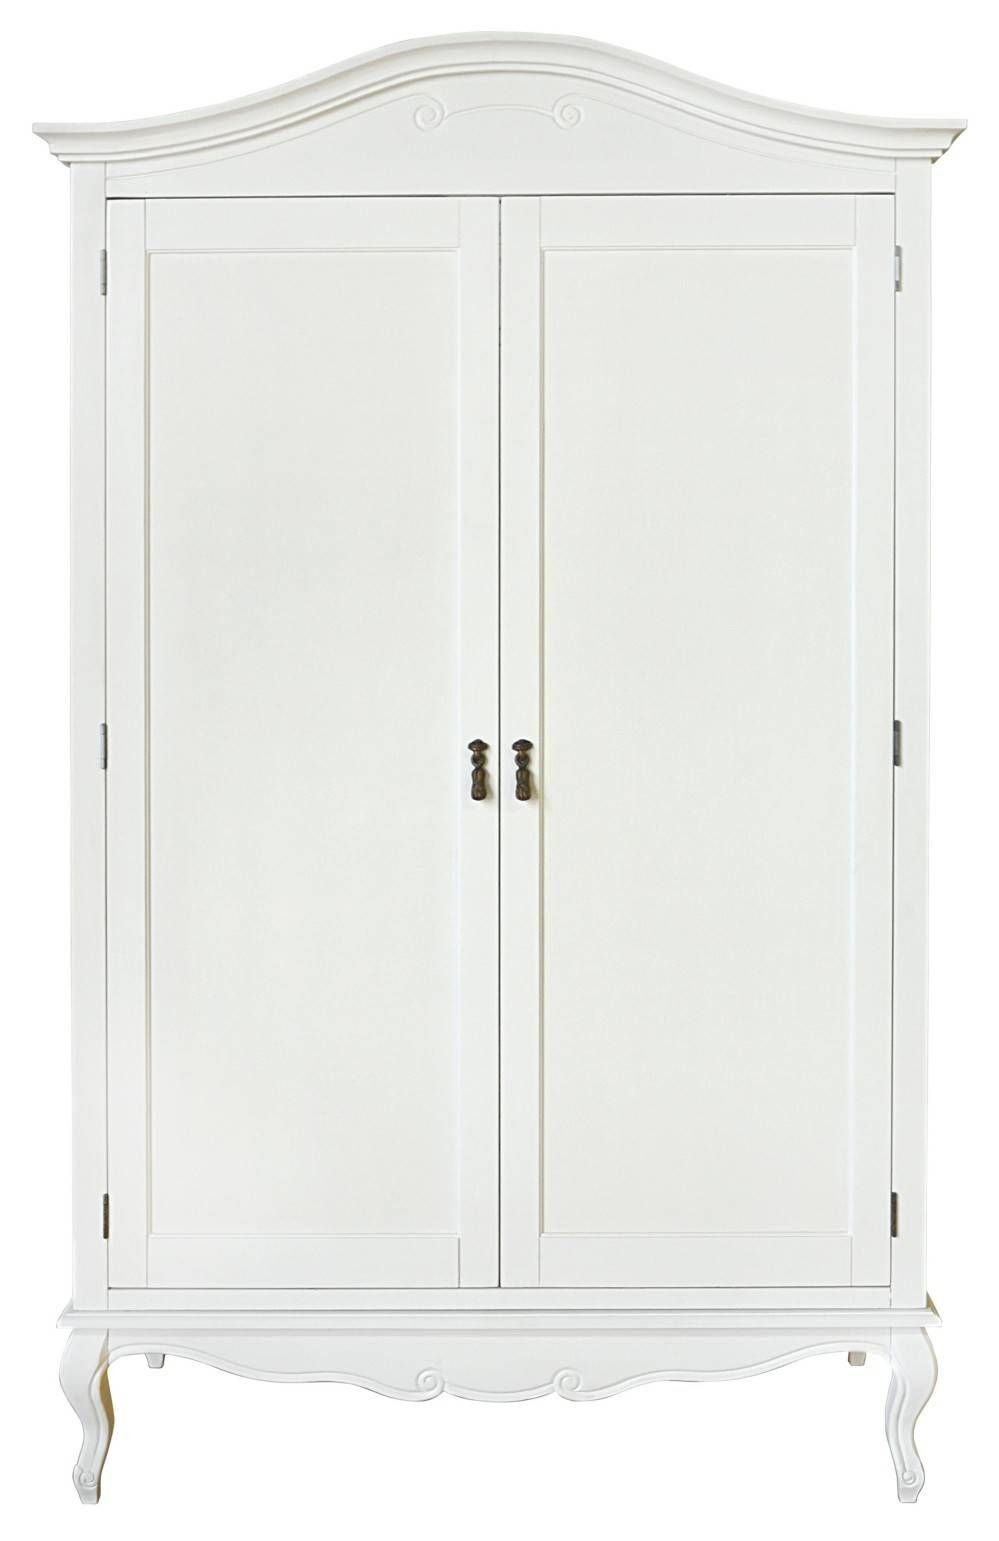 Wardrobes | Bedroom Furniture Direct Regarding Tall Double Rail Wardrobes (View 13 of 30)